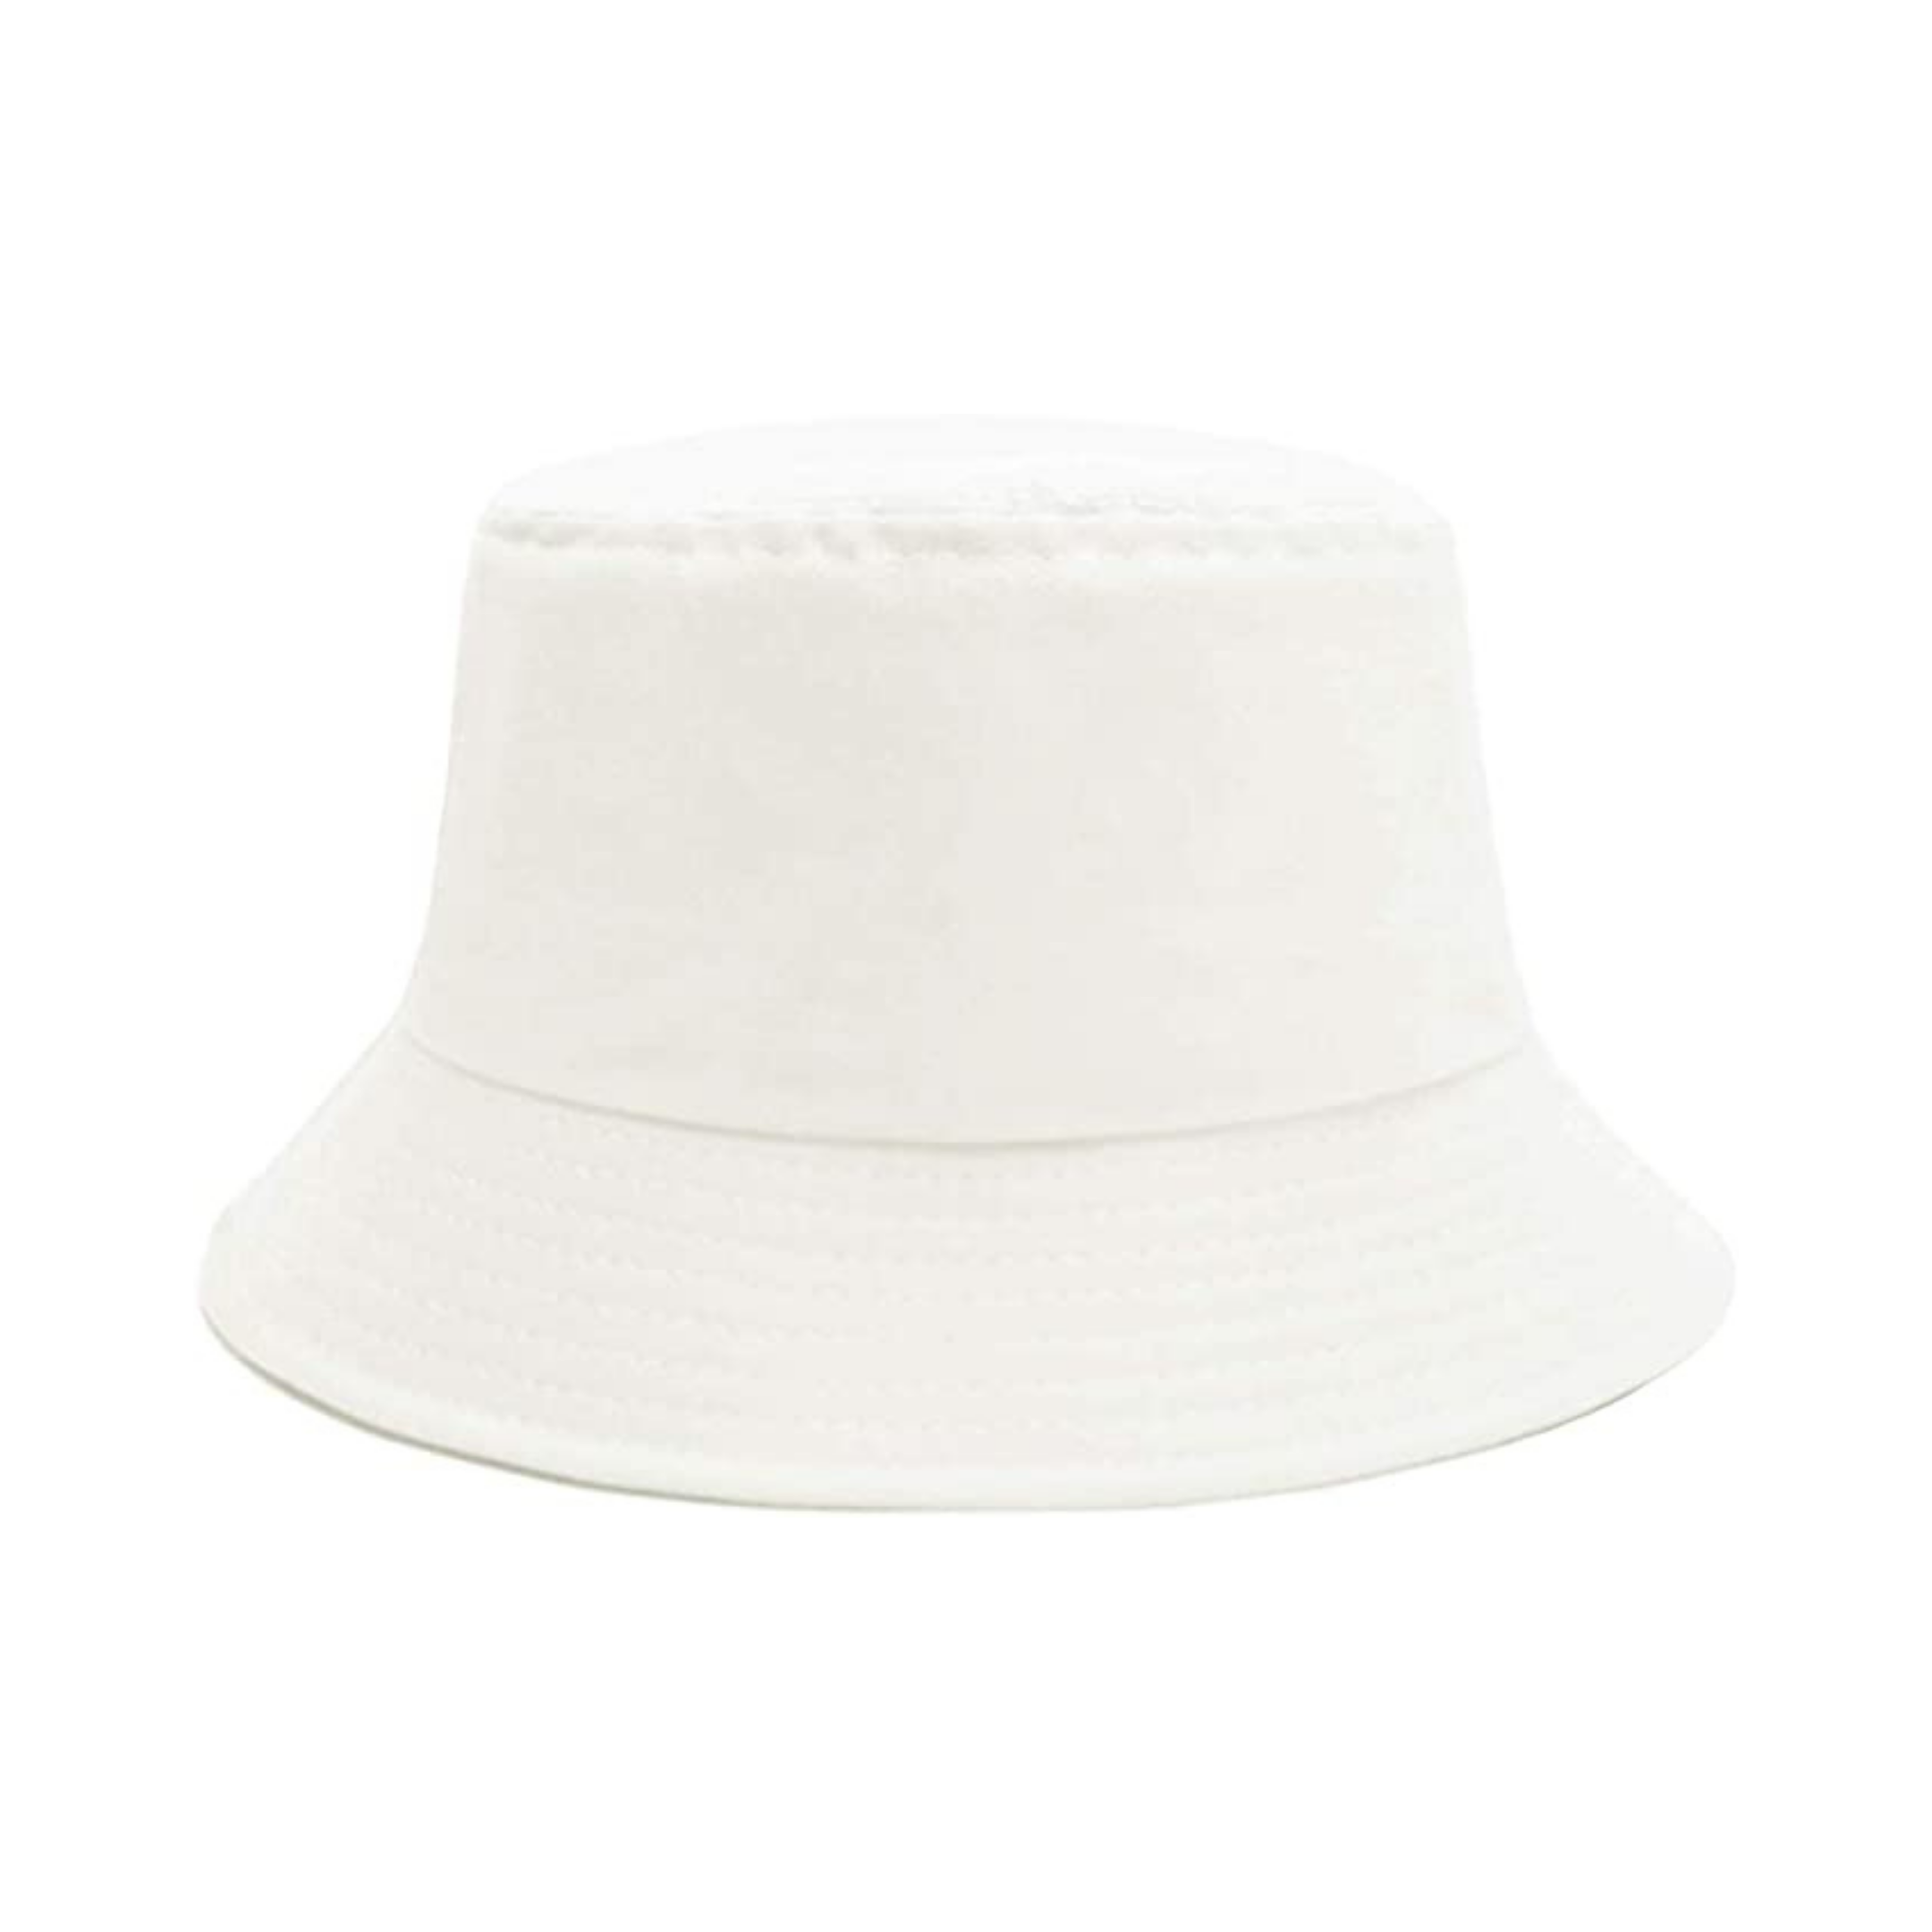 10 Summer Hats To Top Off Any Outfit